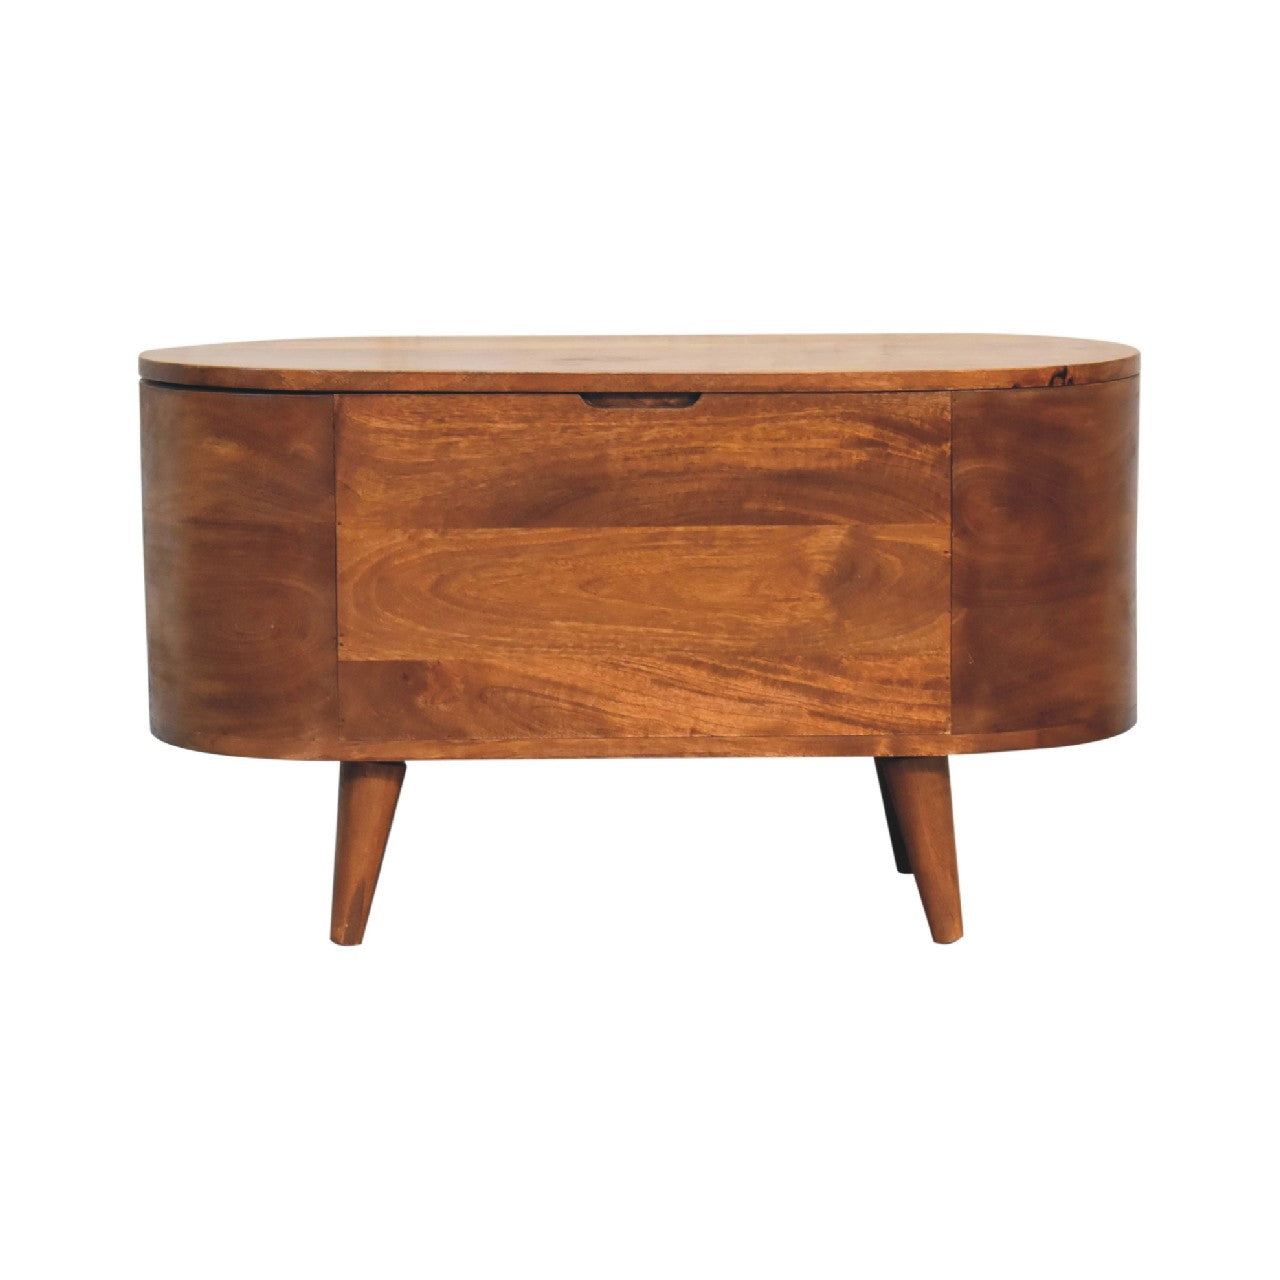 View Chestnut Rounded Lid up Blanket Box information